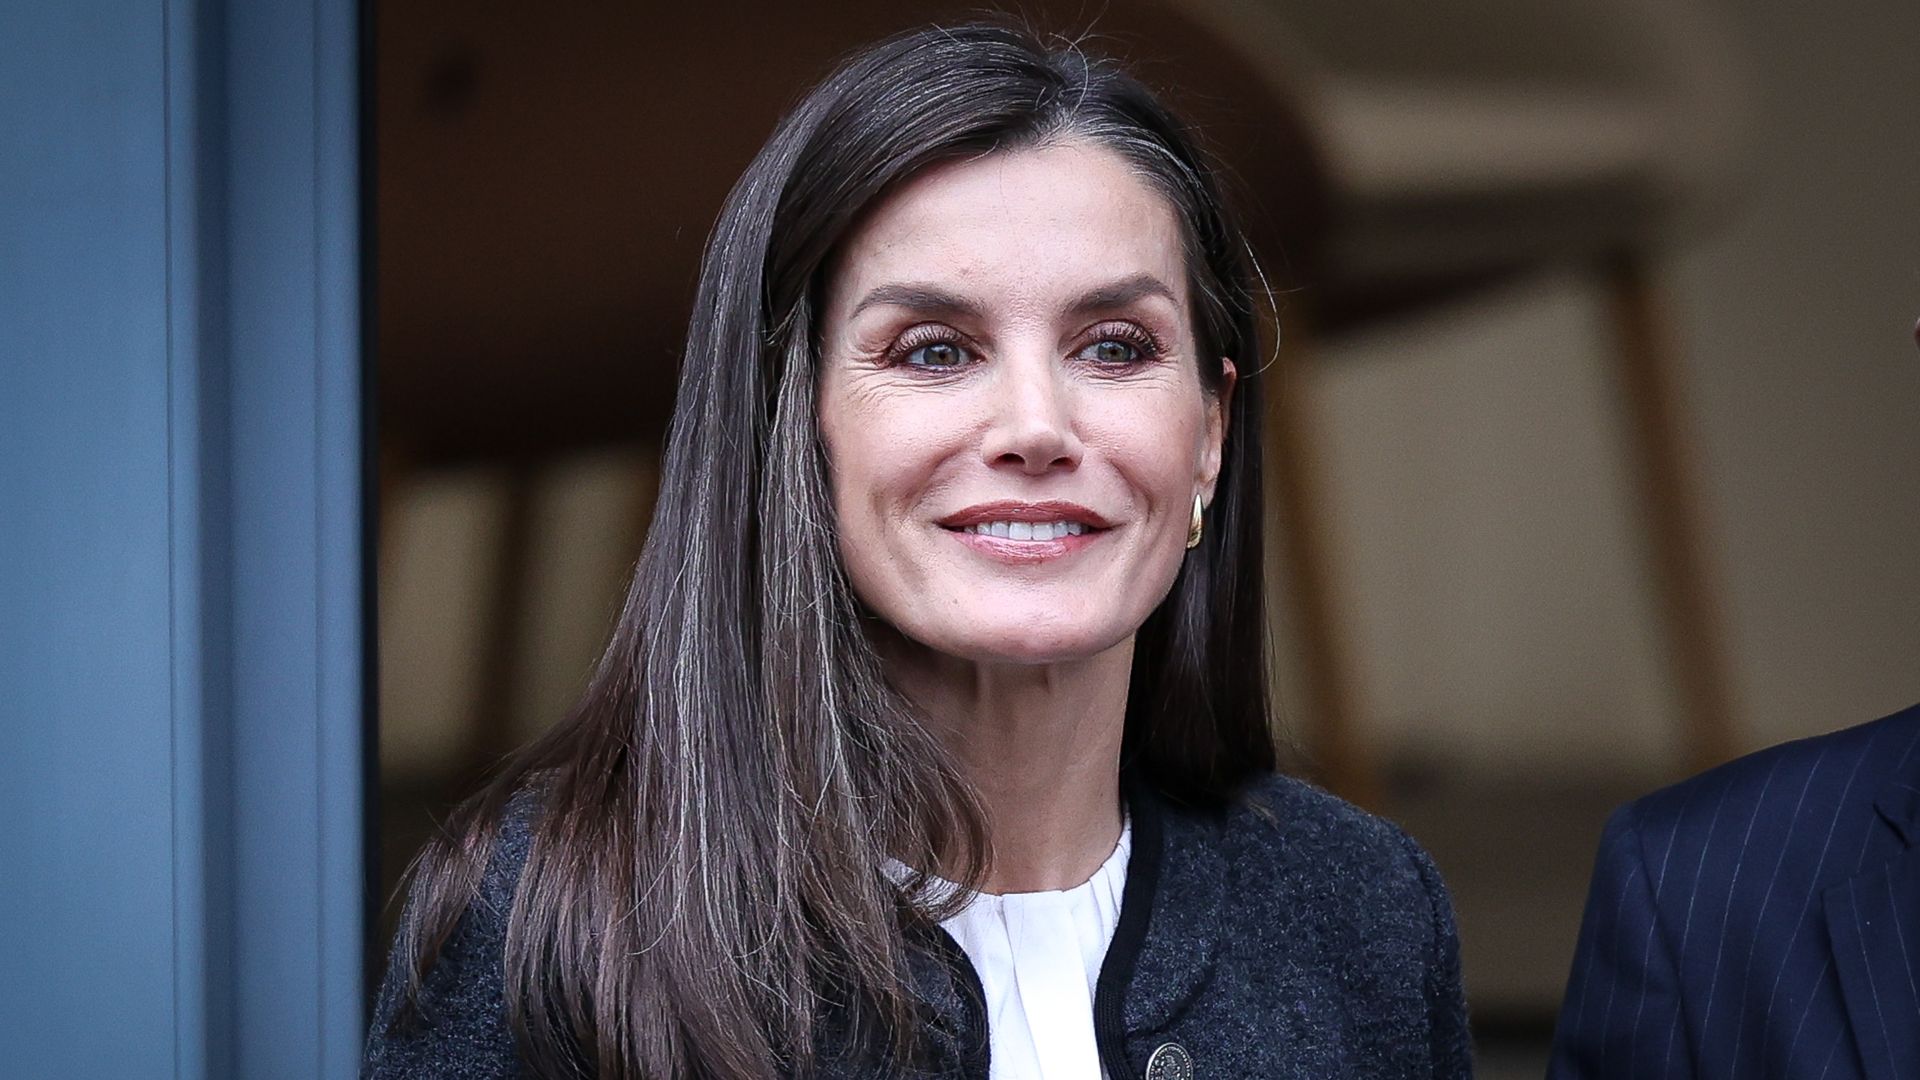 Queen Letizia of Spain in navy jacket and white top